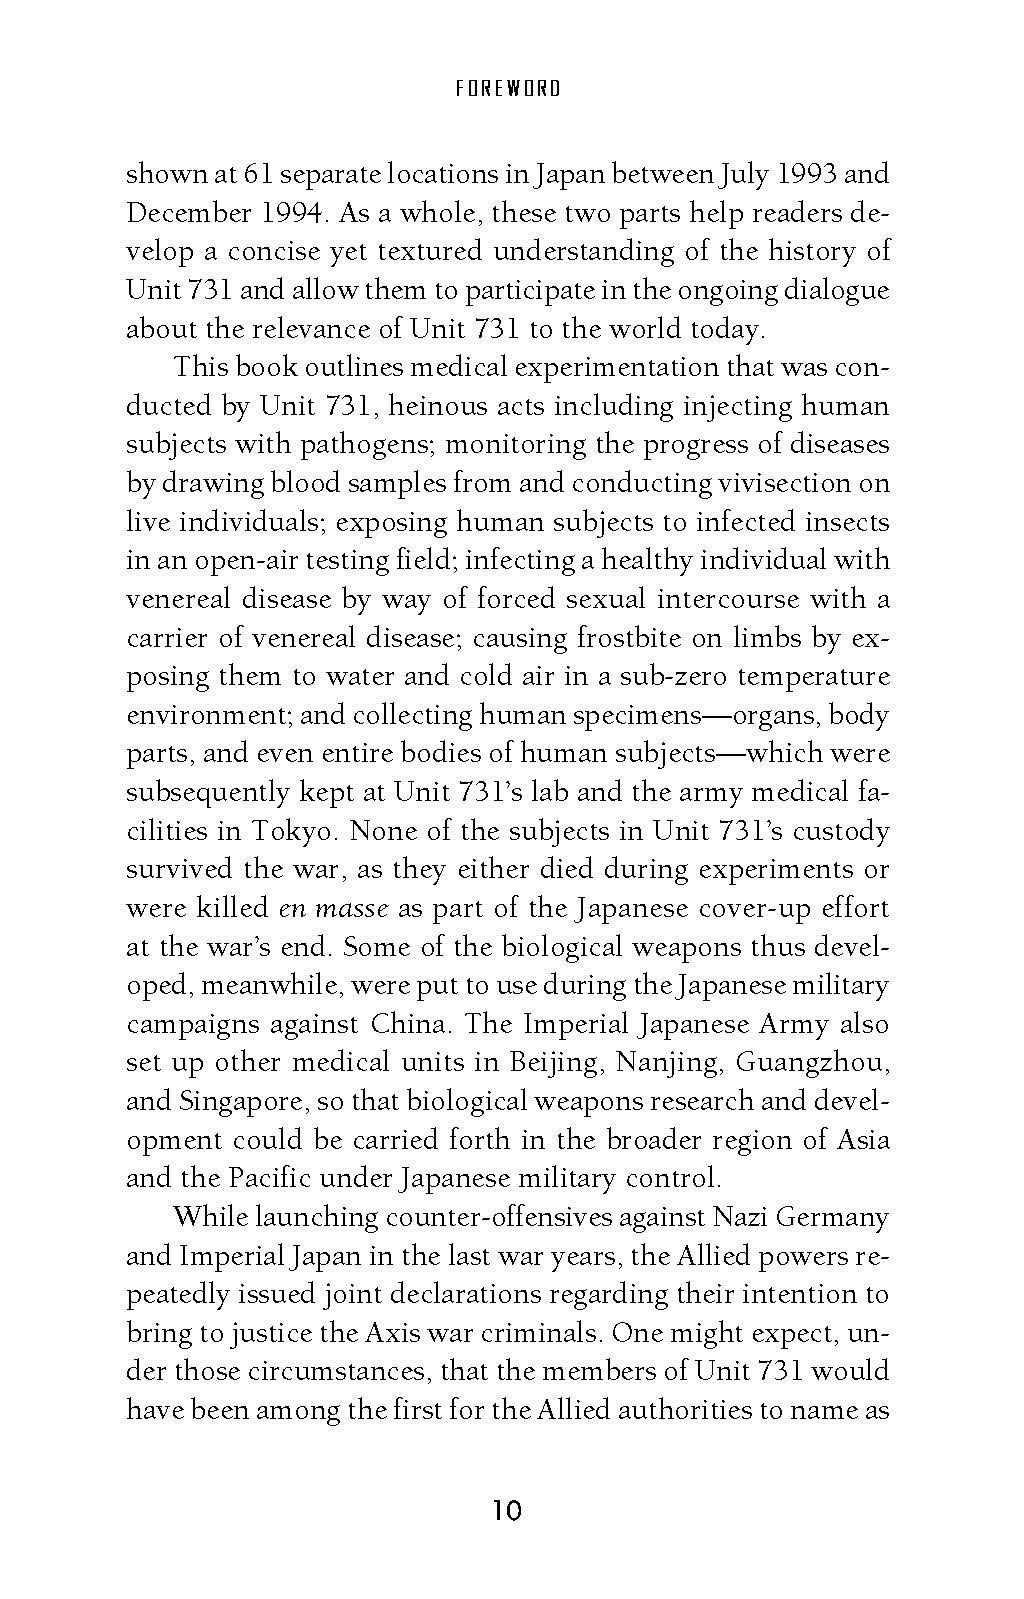 Japan's Infamous Unit 731: Firsthand Accounts of Japan's Wartime Human Experimentation Program (Tuttle Classics)